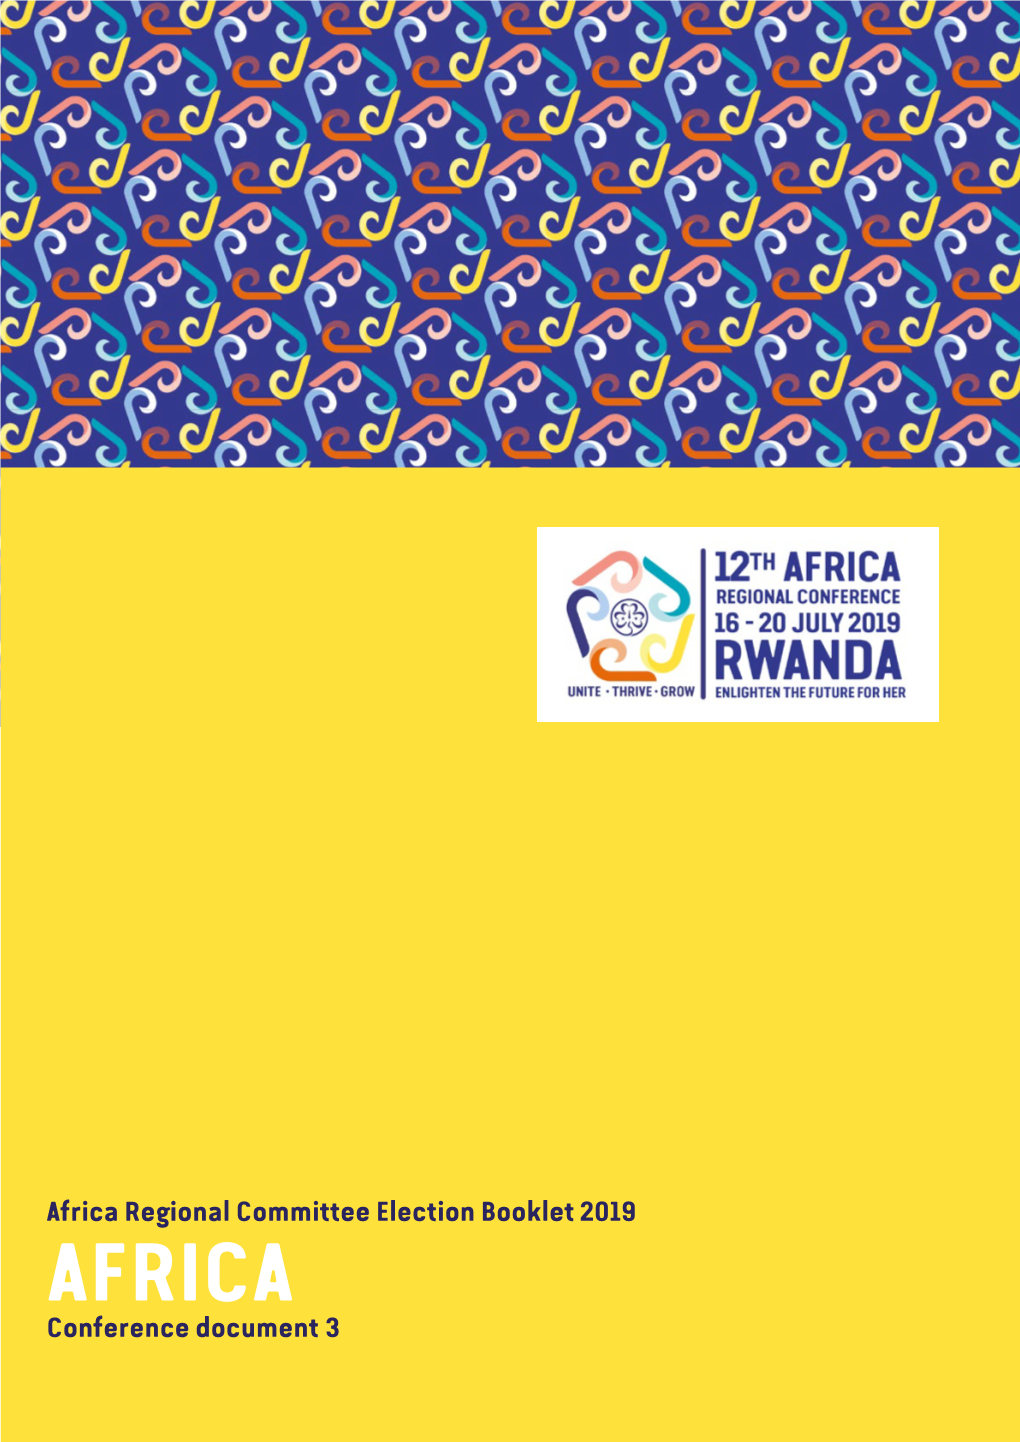 Africa Regional Committee Election Booklet 2019 AFRICA Conference Document 3 REGIONAL COMMITTEE ELECTION